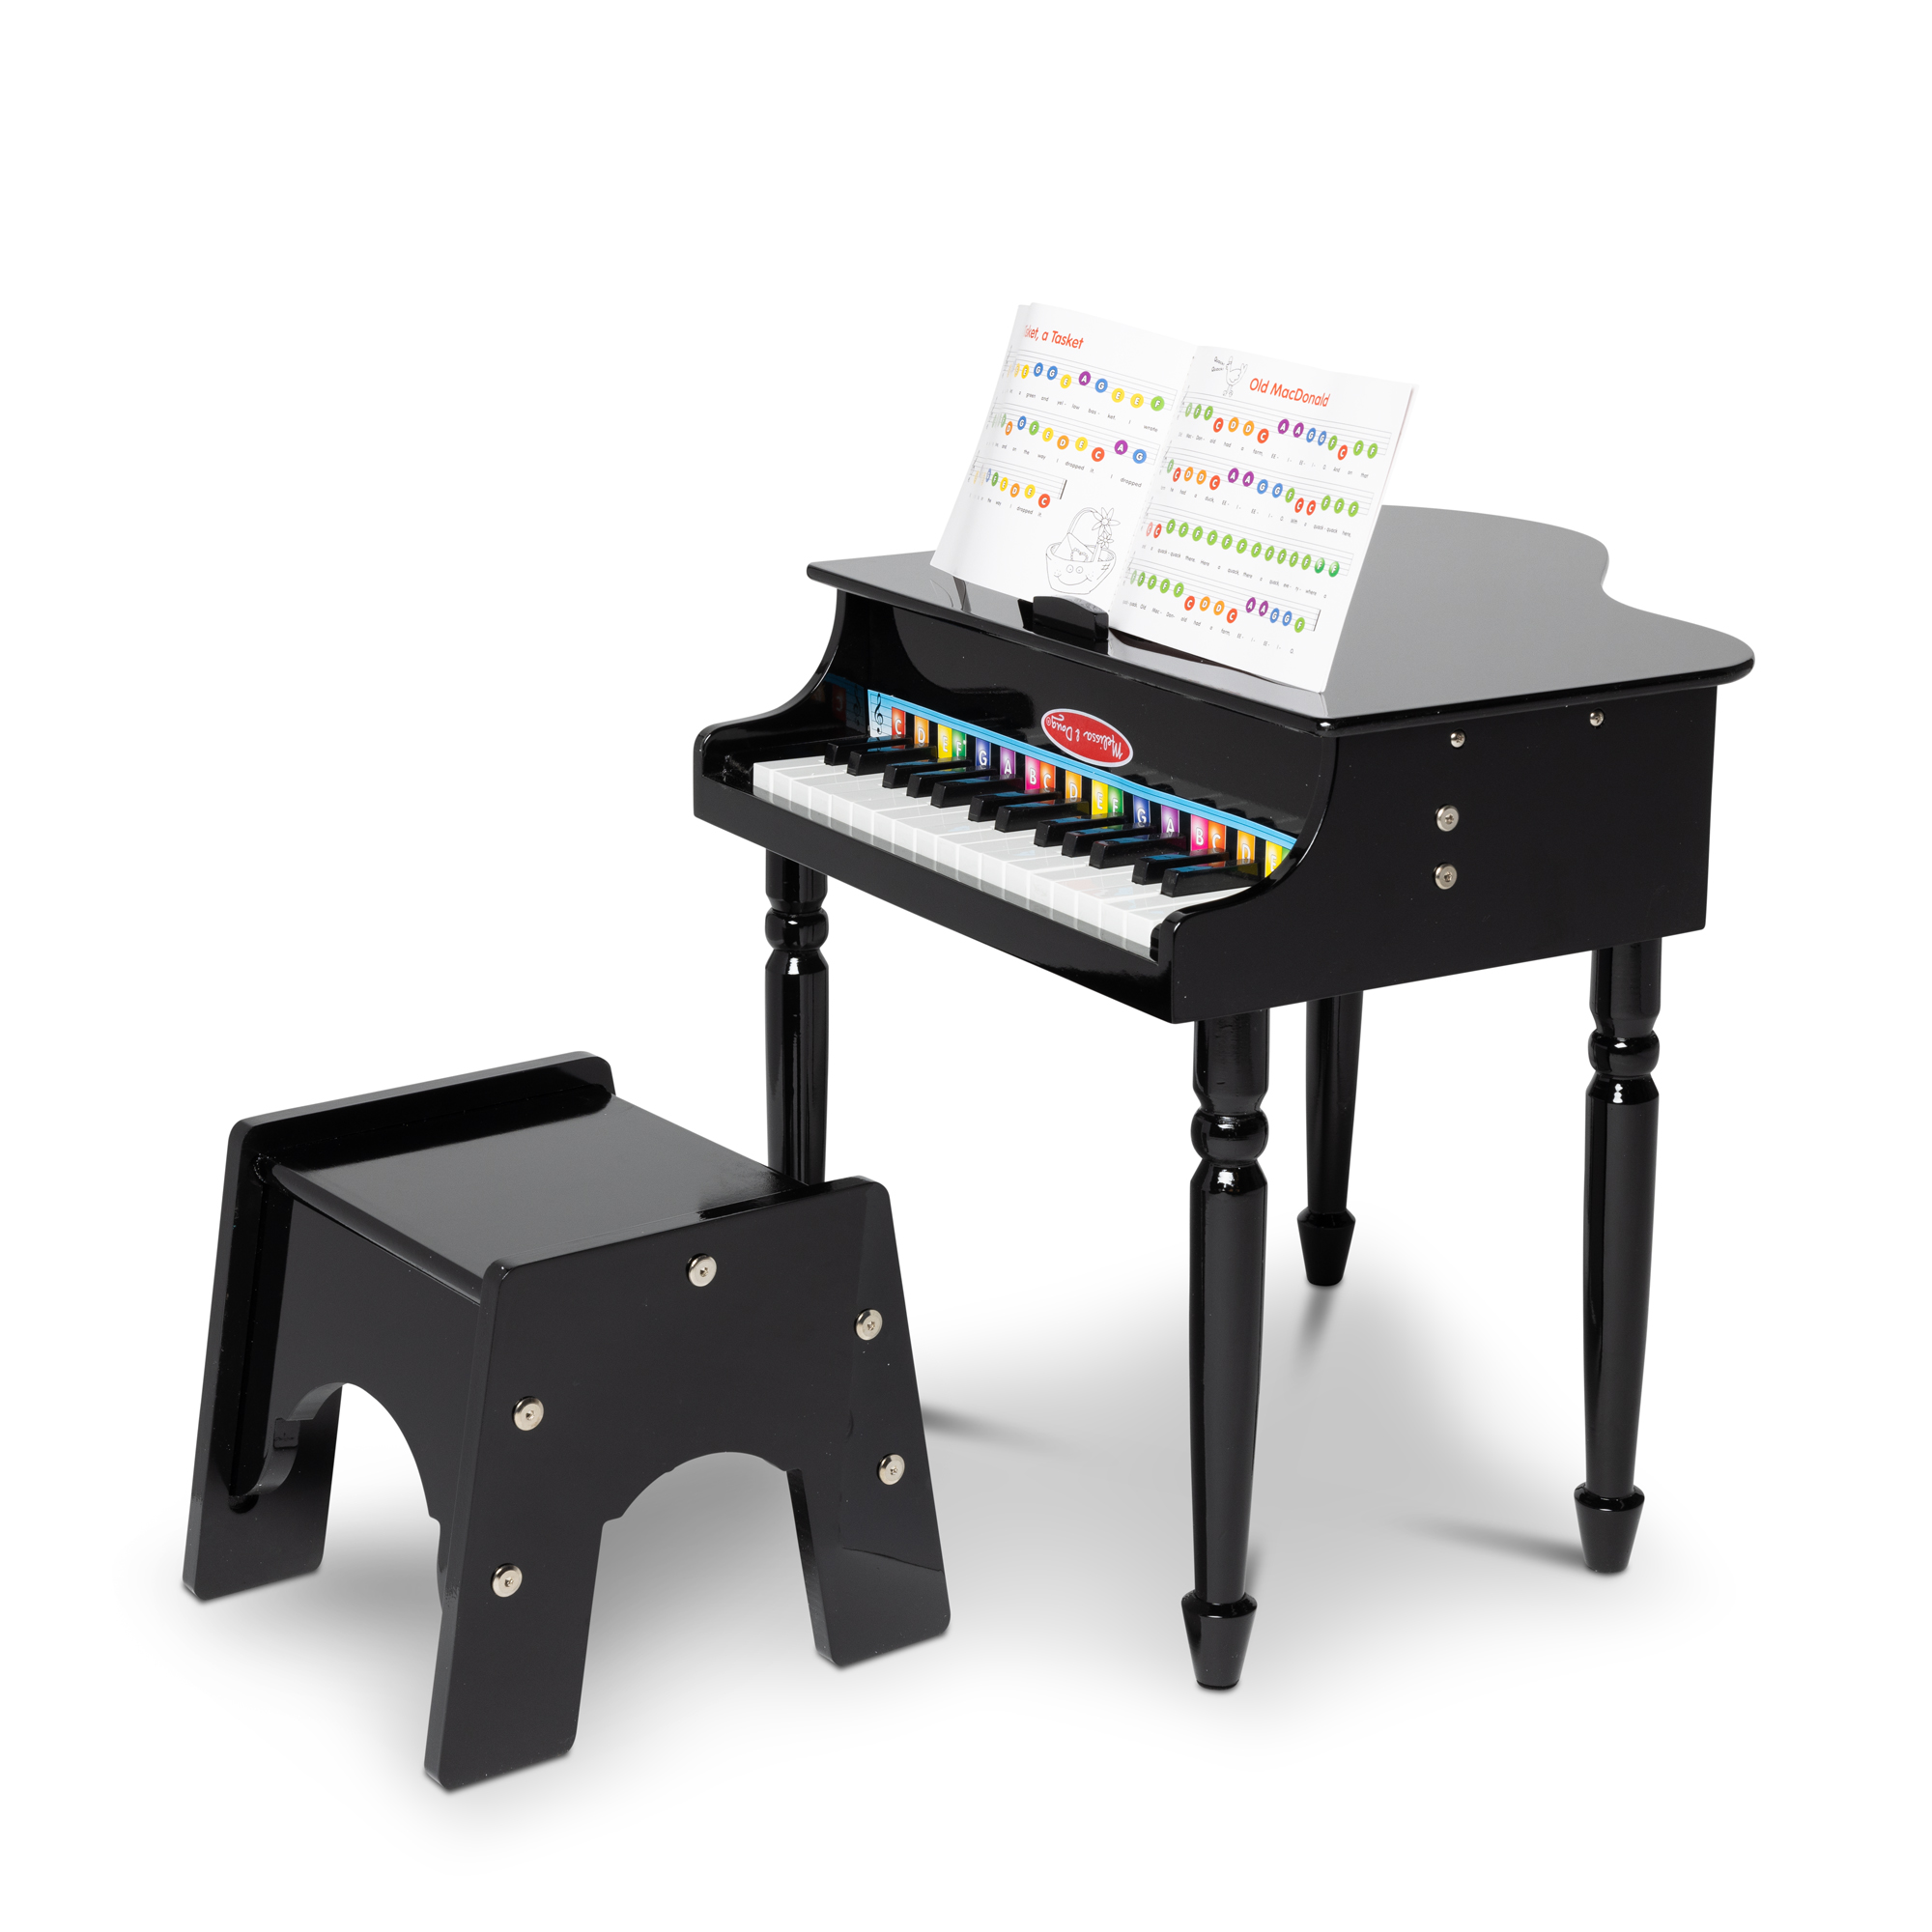 Melissa & Doug Learn-To-Play Classic Grand Piano Toy For Kids With 30 Keys, Color-Coded Songbook, and Non-Tip Bench - image 1 of 10